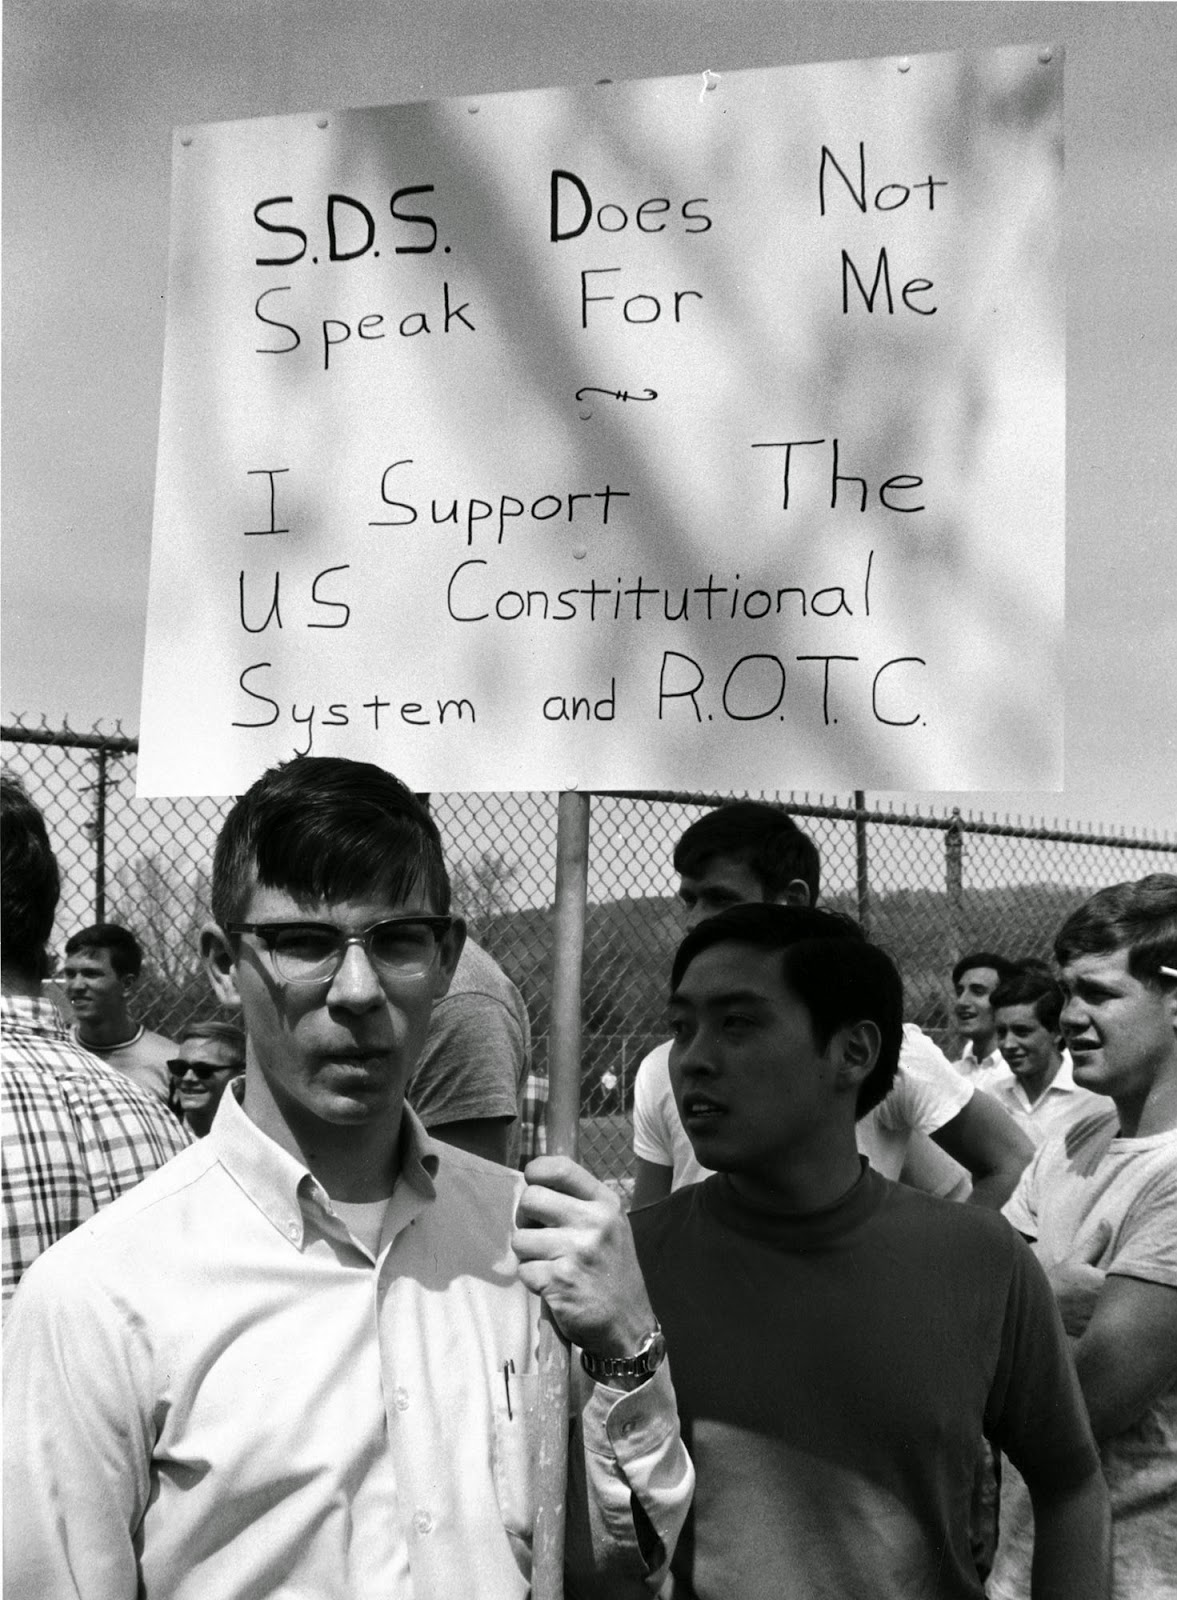 A photograph of a young man holding up a sign that reads "S.D.S. does not speak for me. I support the US Constitutional System and R.O.T.C."